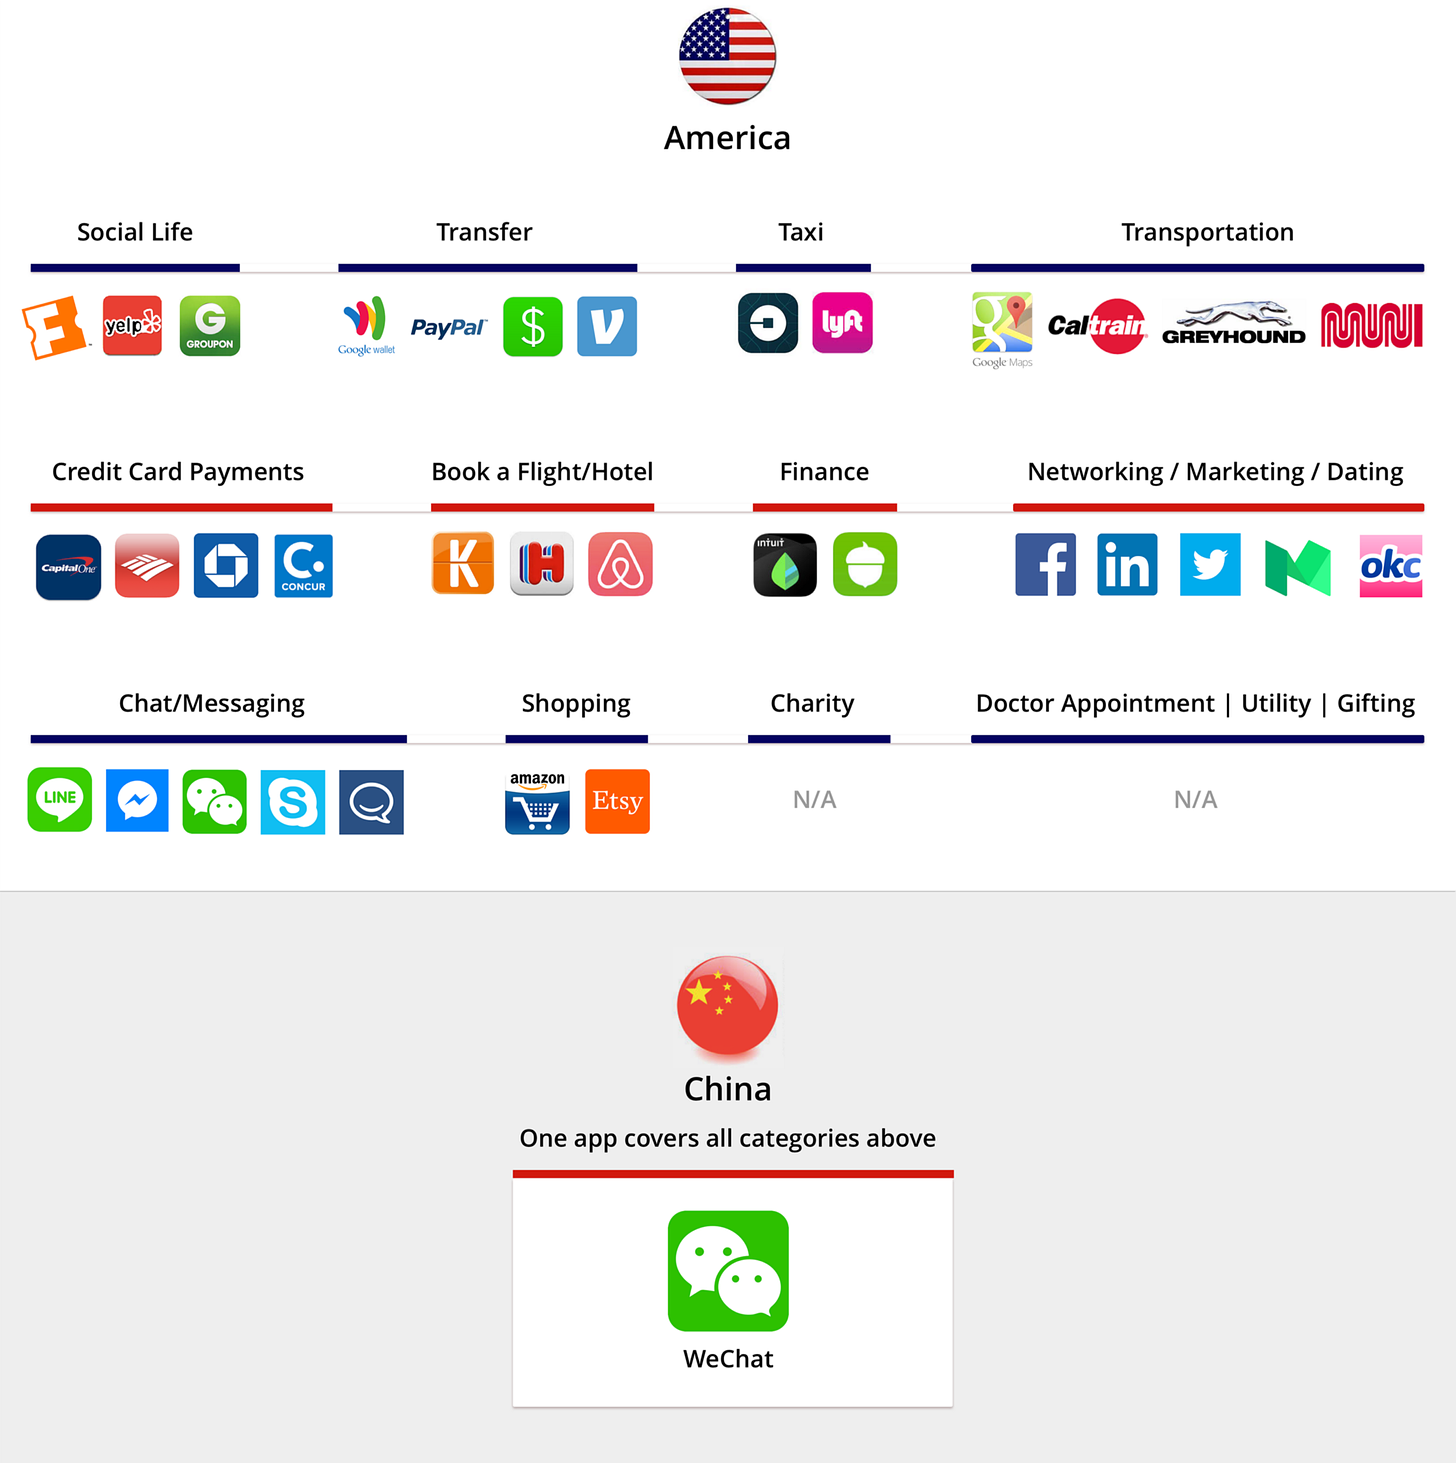 Image result for wechat vs america